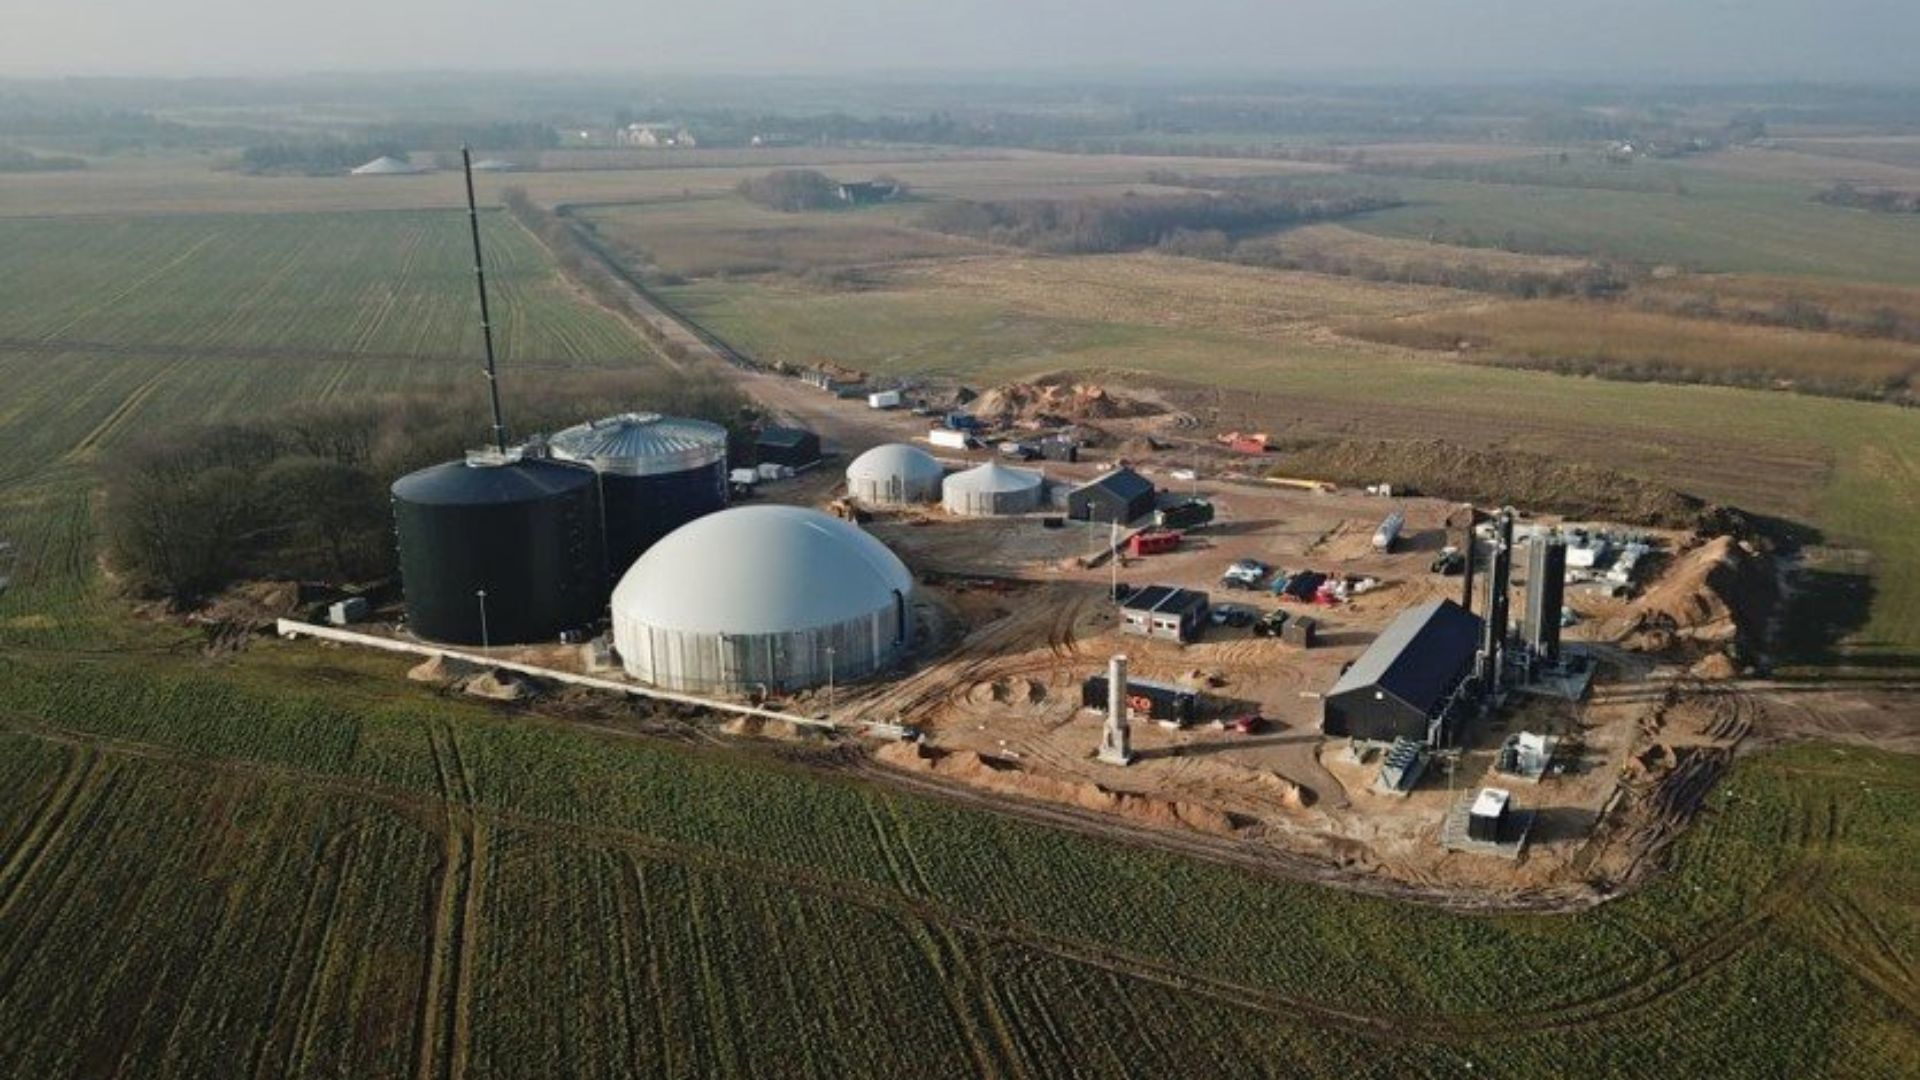 Infranode has agreed to acquire a 49% stake in the two biogas plants Thorsø Biogas Anlæg and Foersom Bioenergi